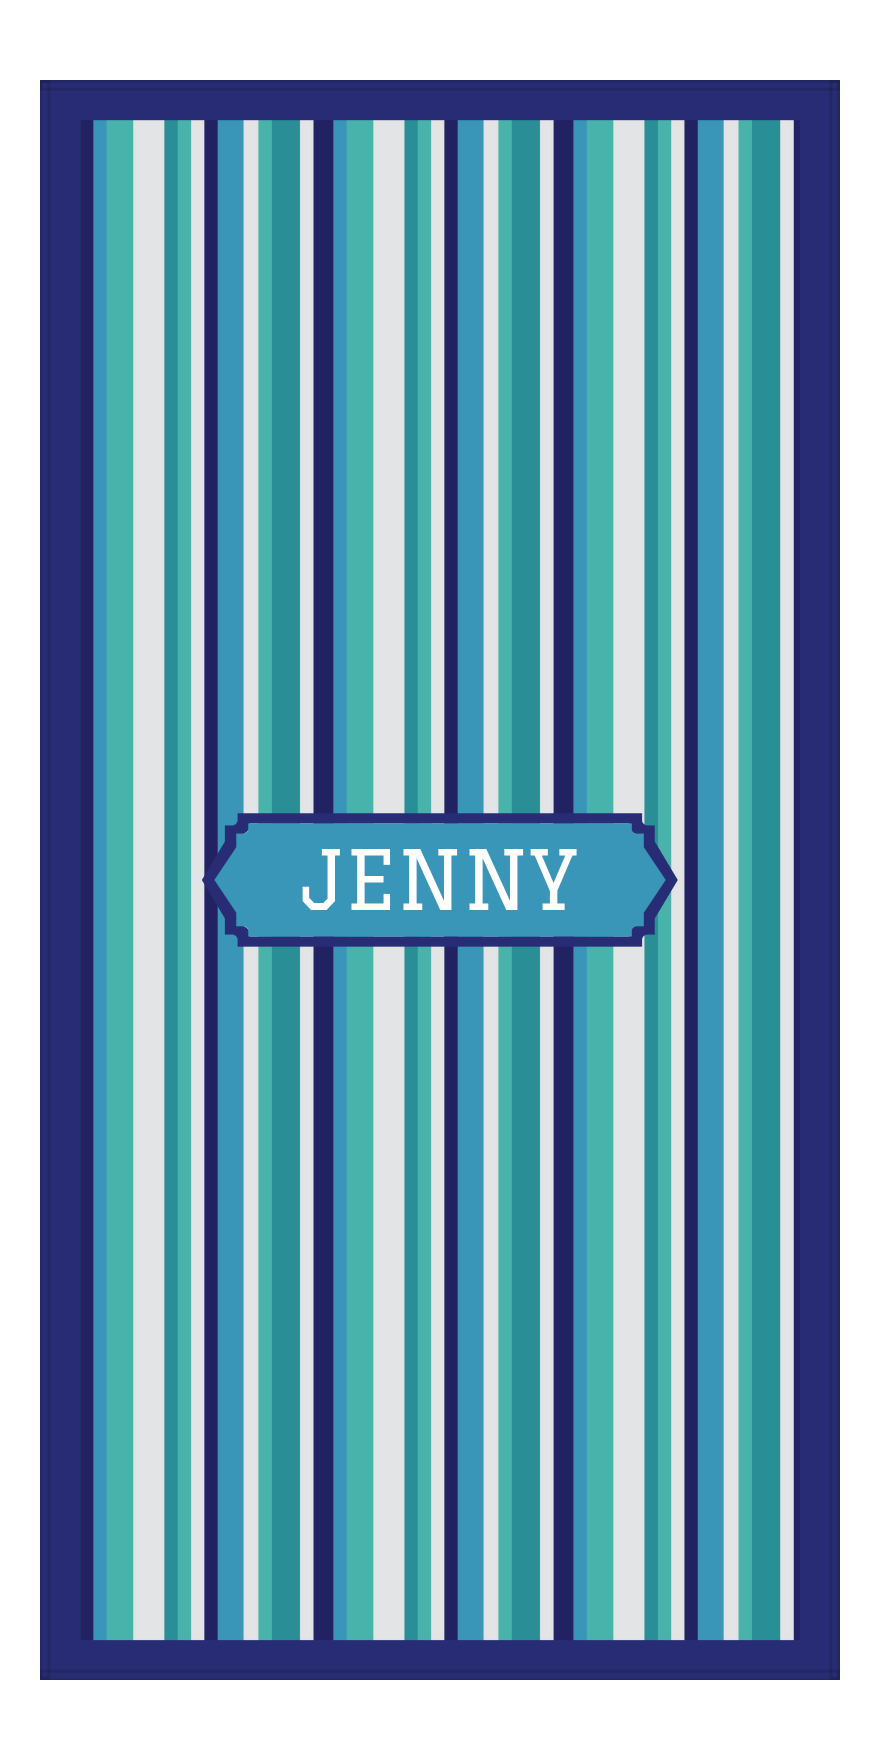 Personalized 5 Color Stripes 3 Repeat Beach Towel - Vertical - Oblong Frame - Front View